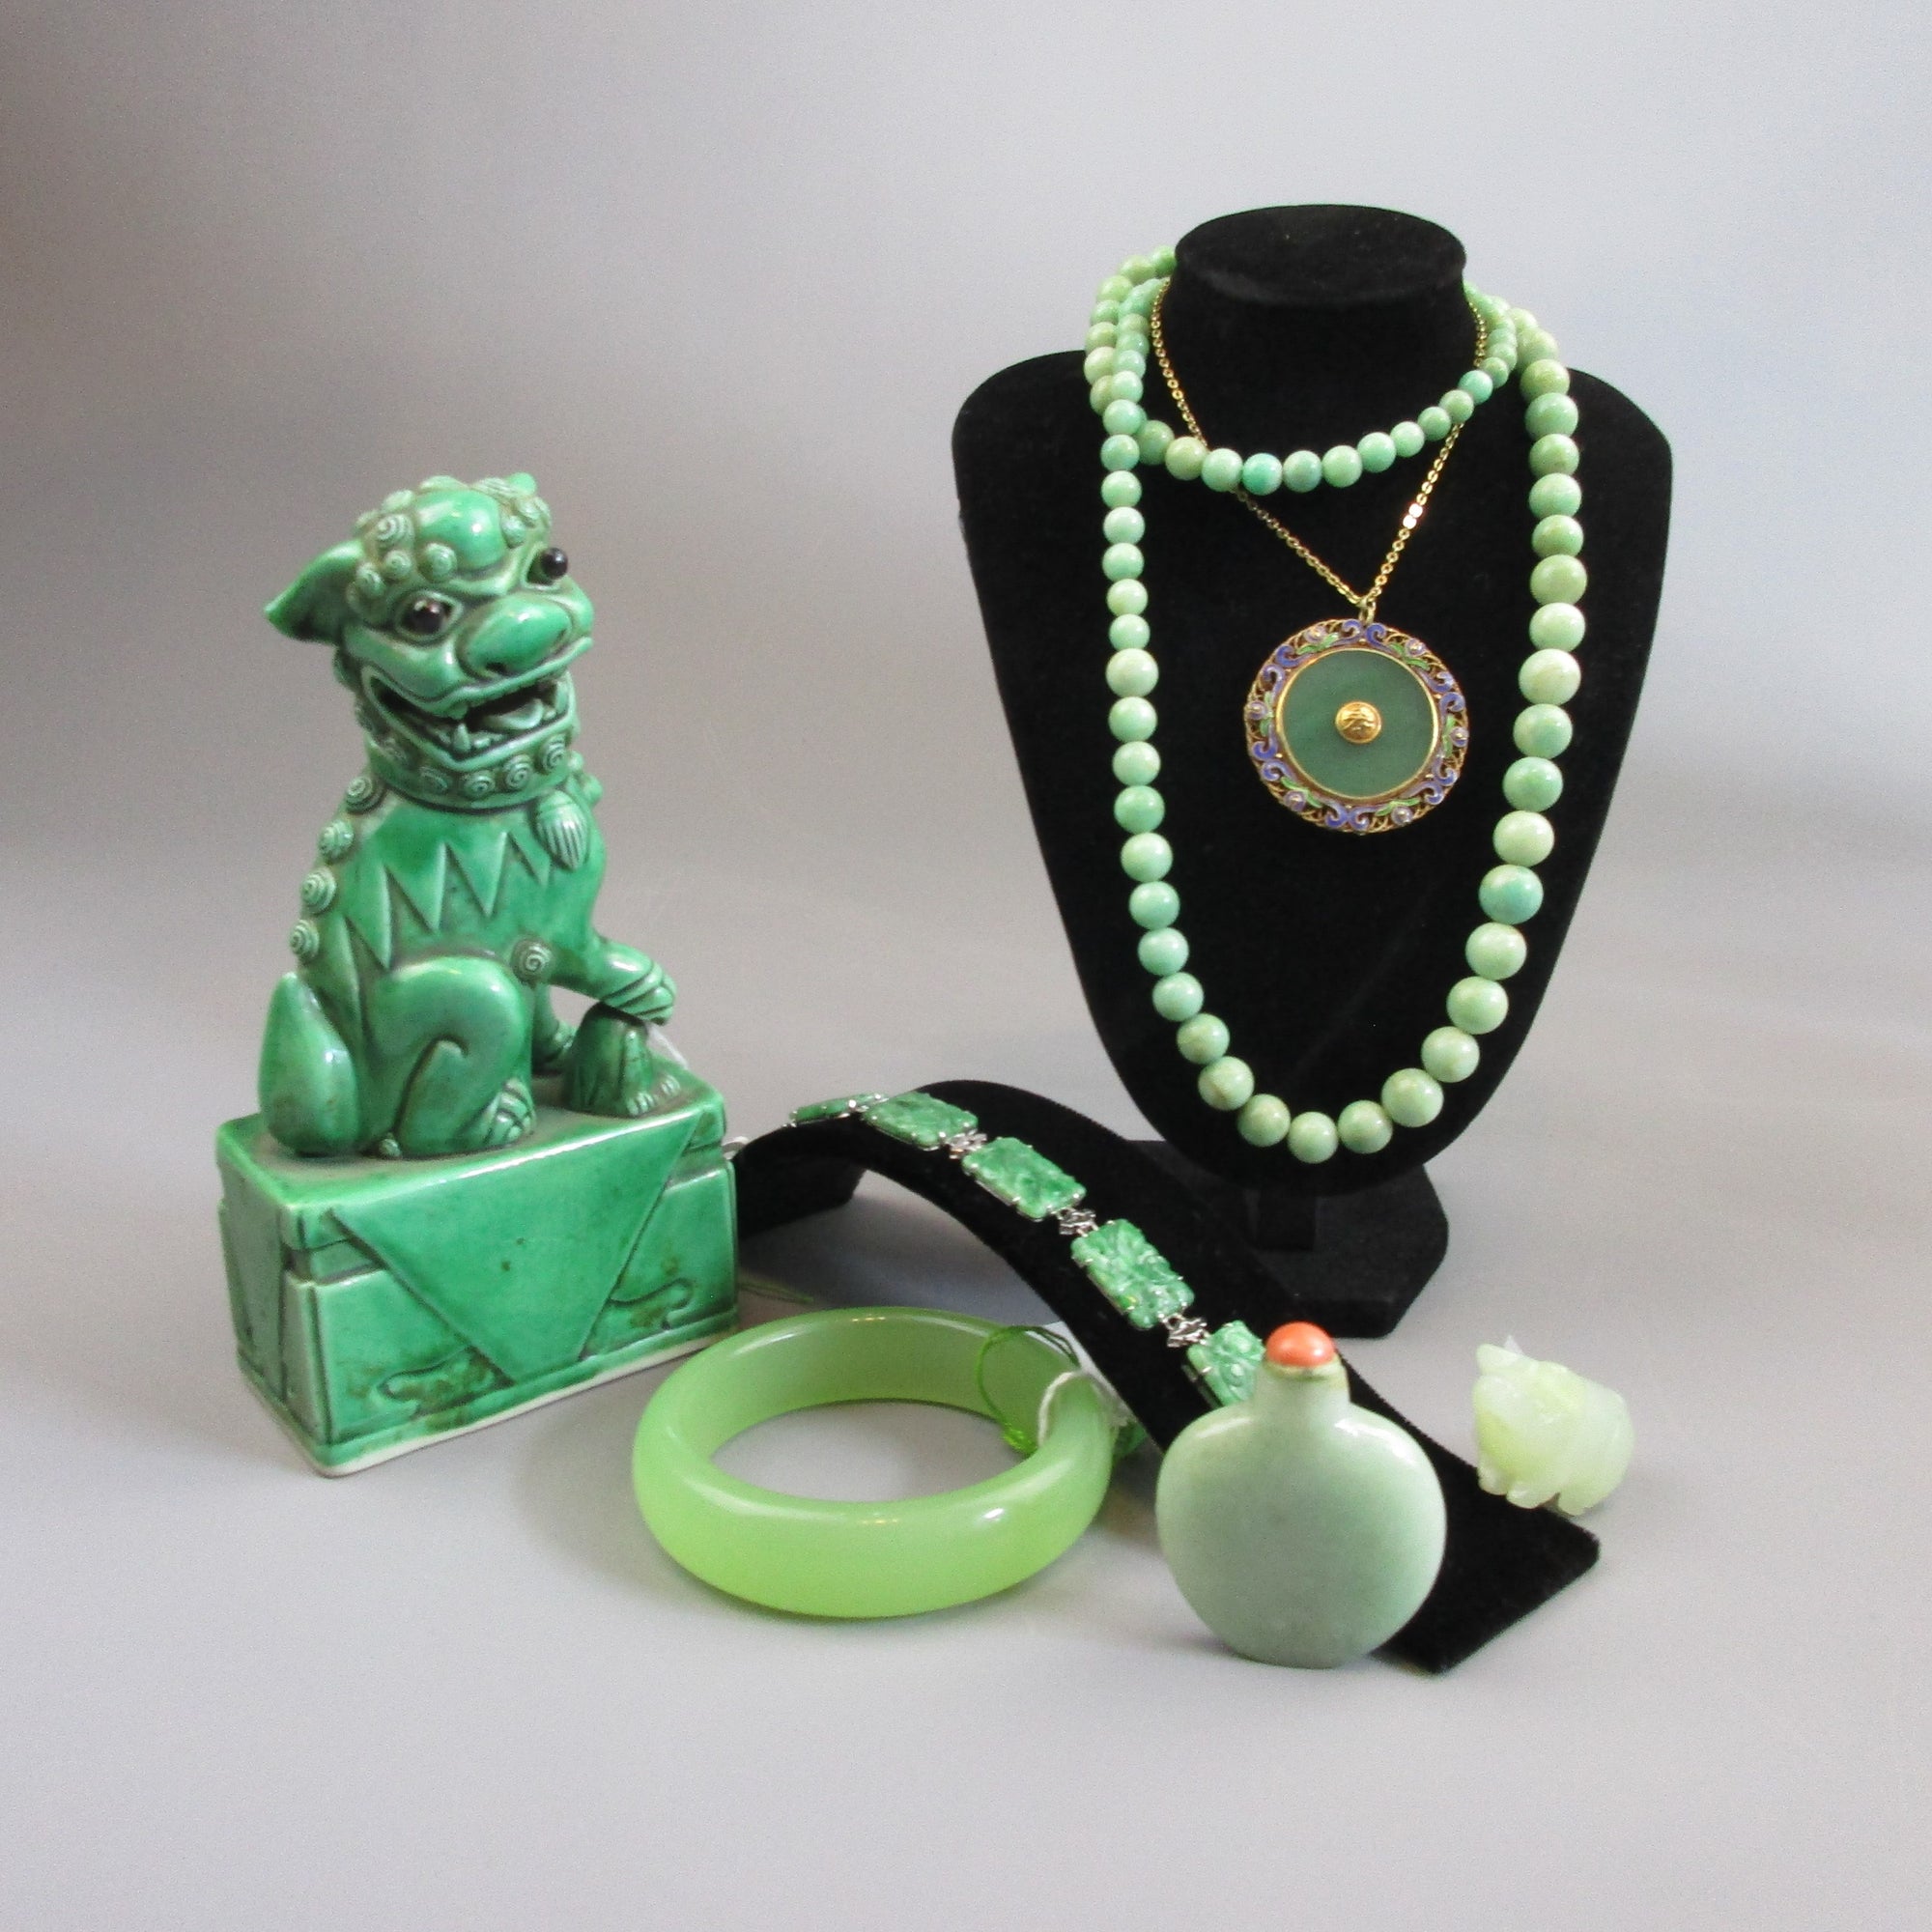 Dealer 'Jade Trading' Dealing In Protection And Good Luck.